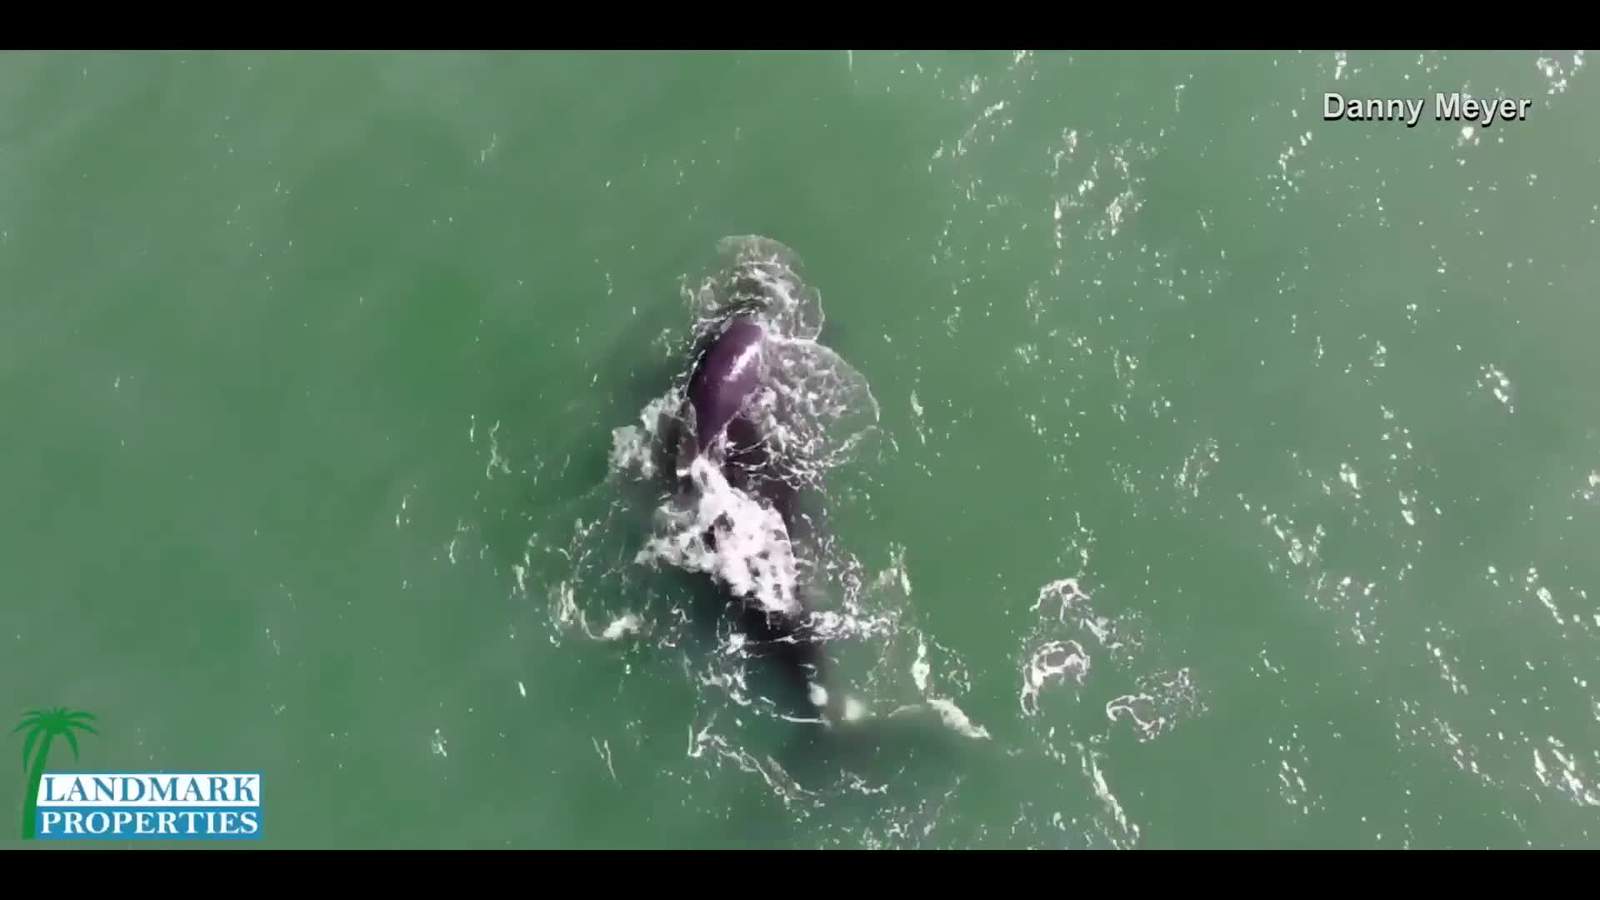 Right whale with calf spotted off Flagler Beach